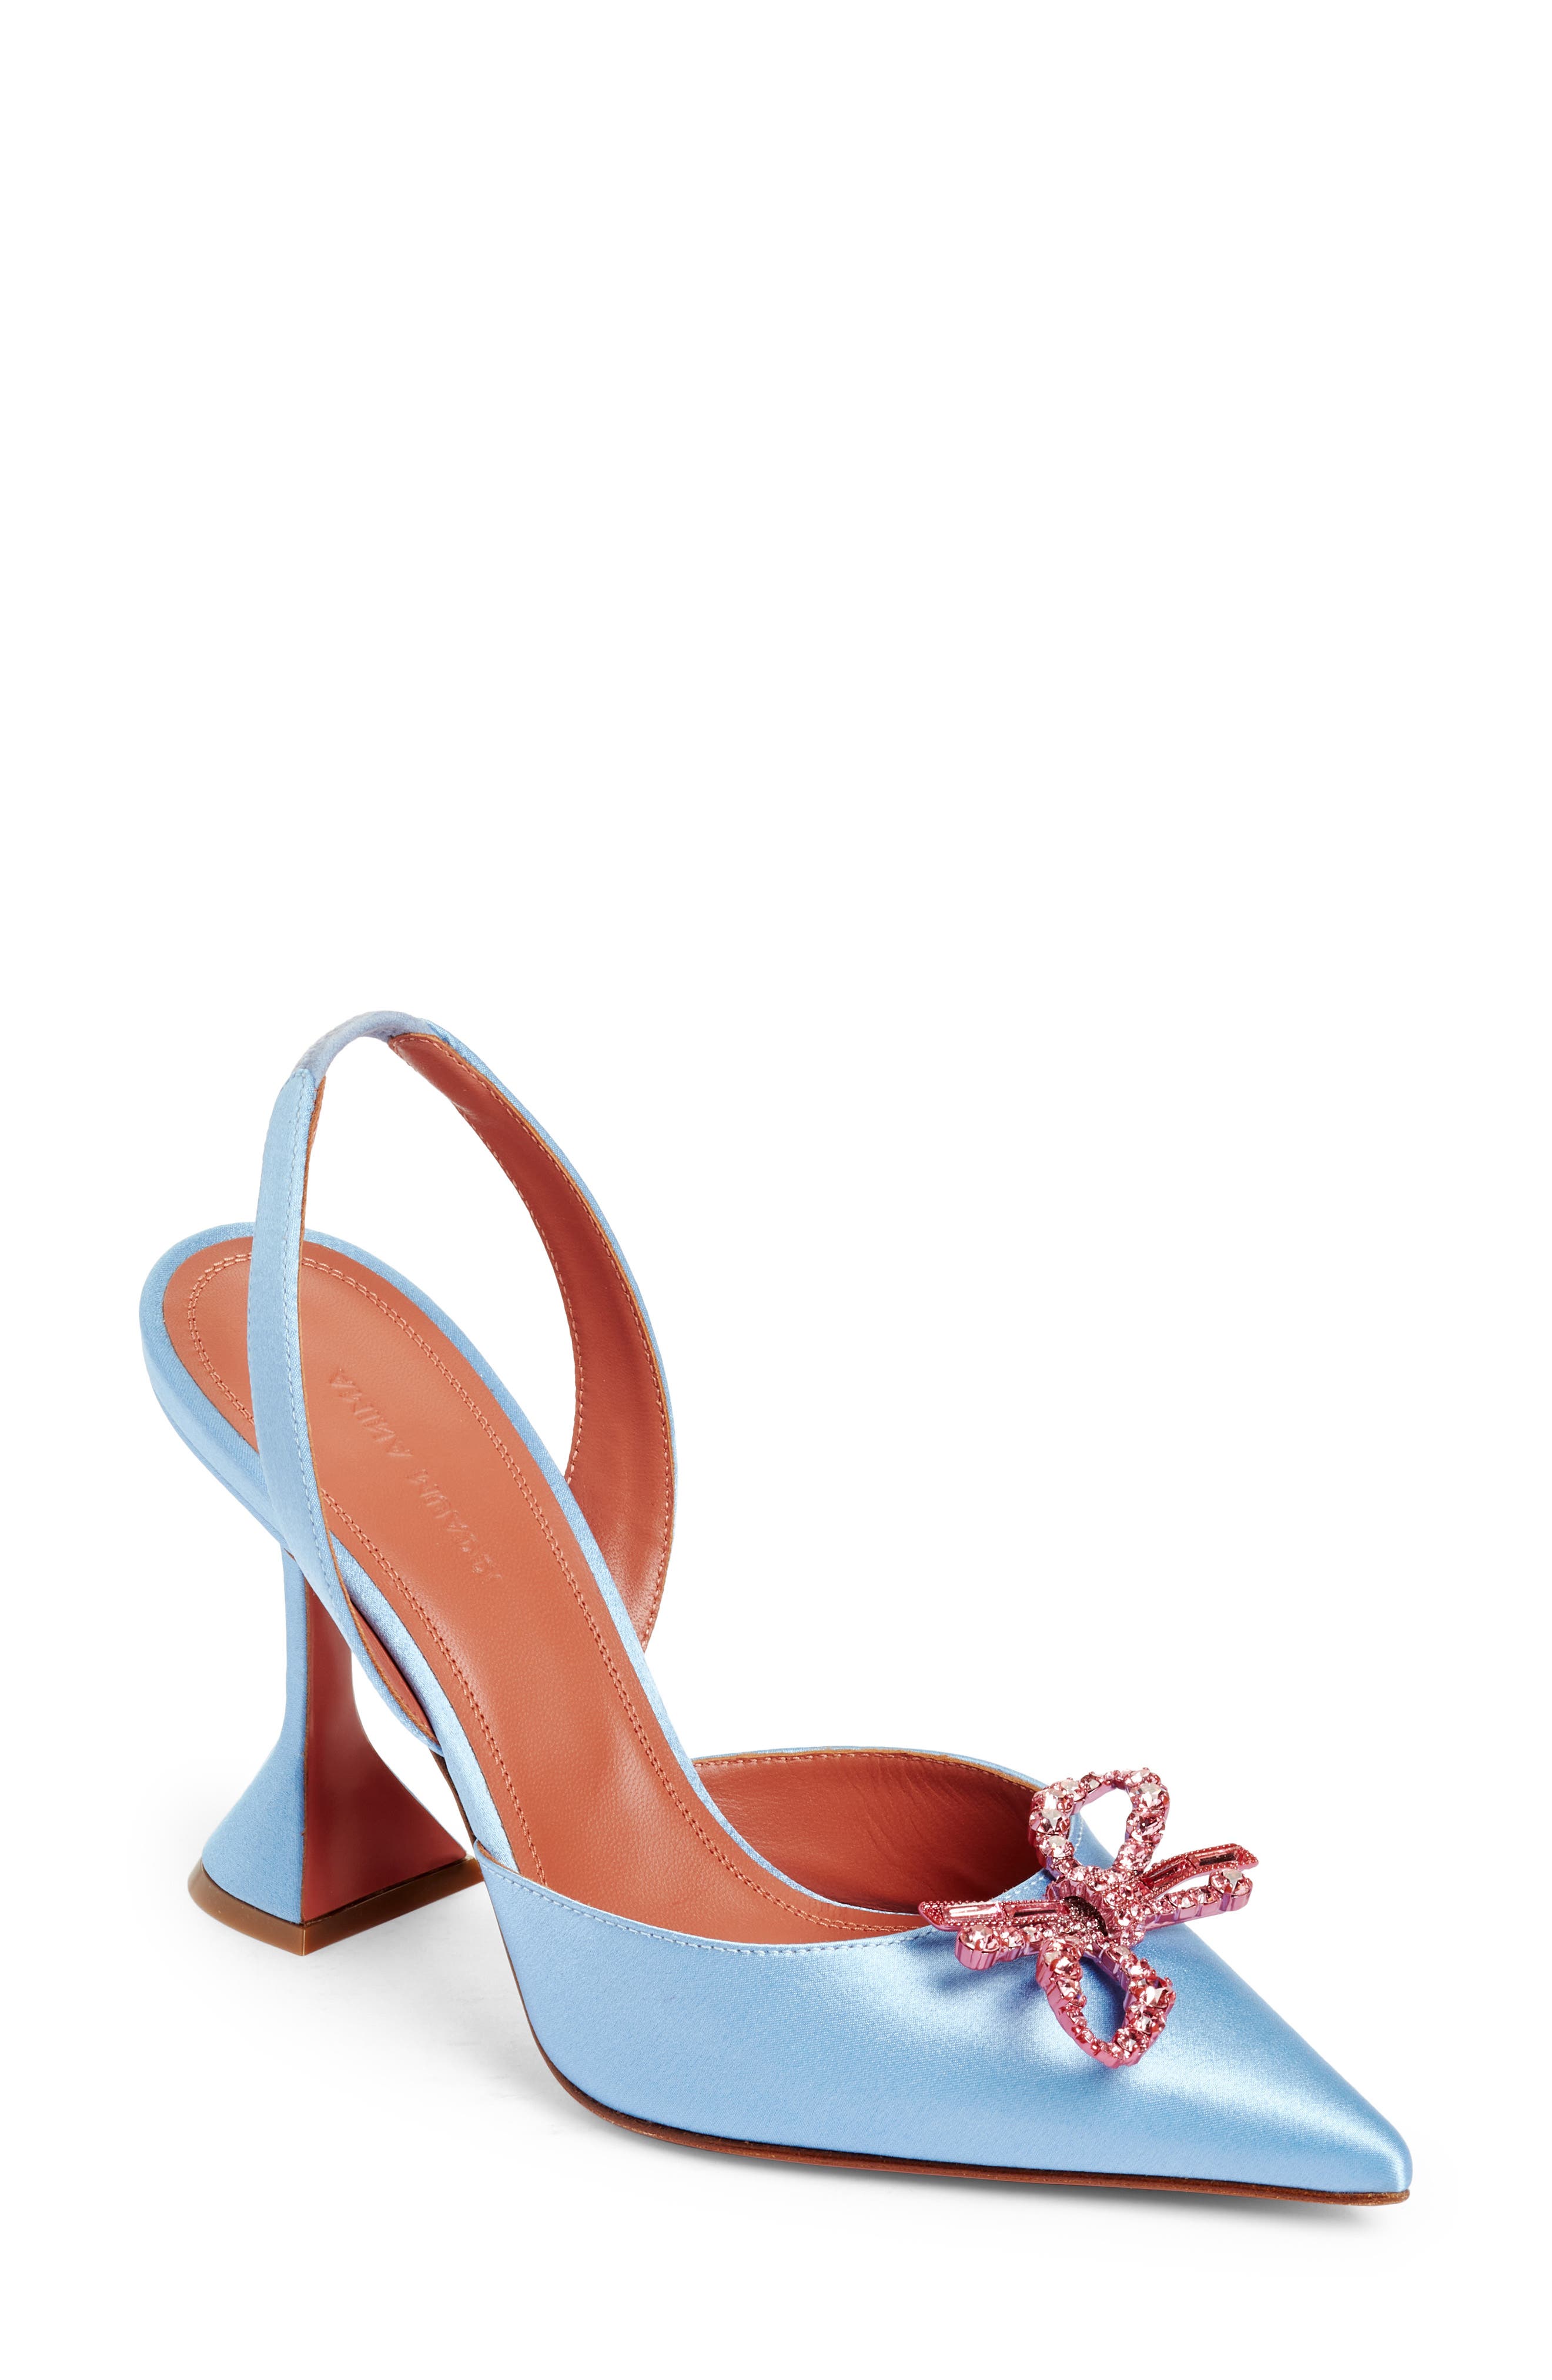 Amina Muaddi Rosie Pointed Toe Slingback Pump in Powder Blue /Rose Crystals at Nordstrom, Size 11Us